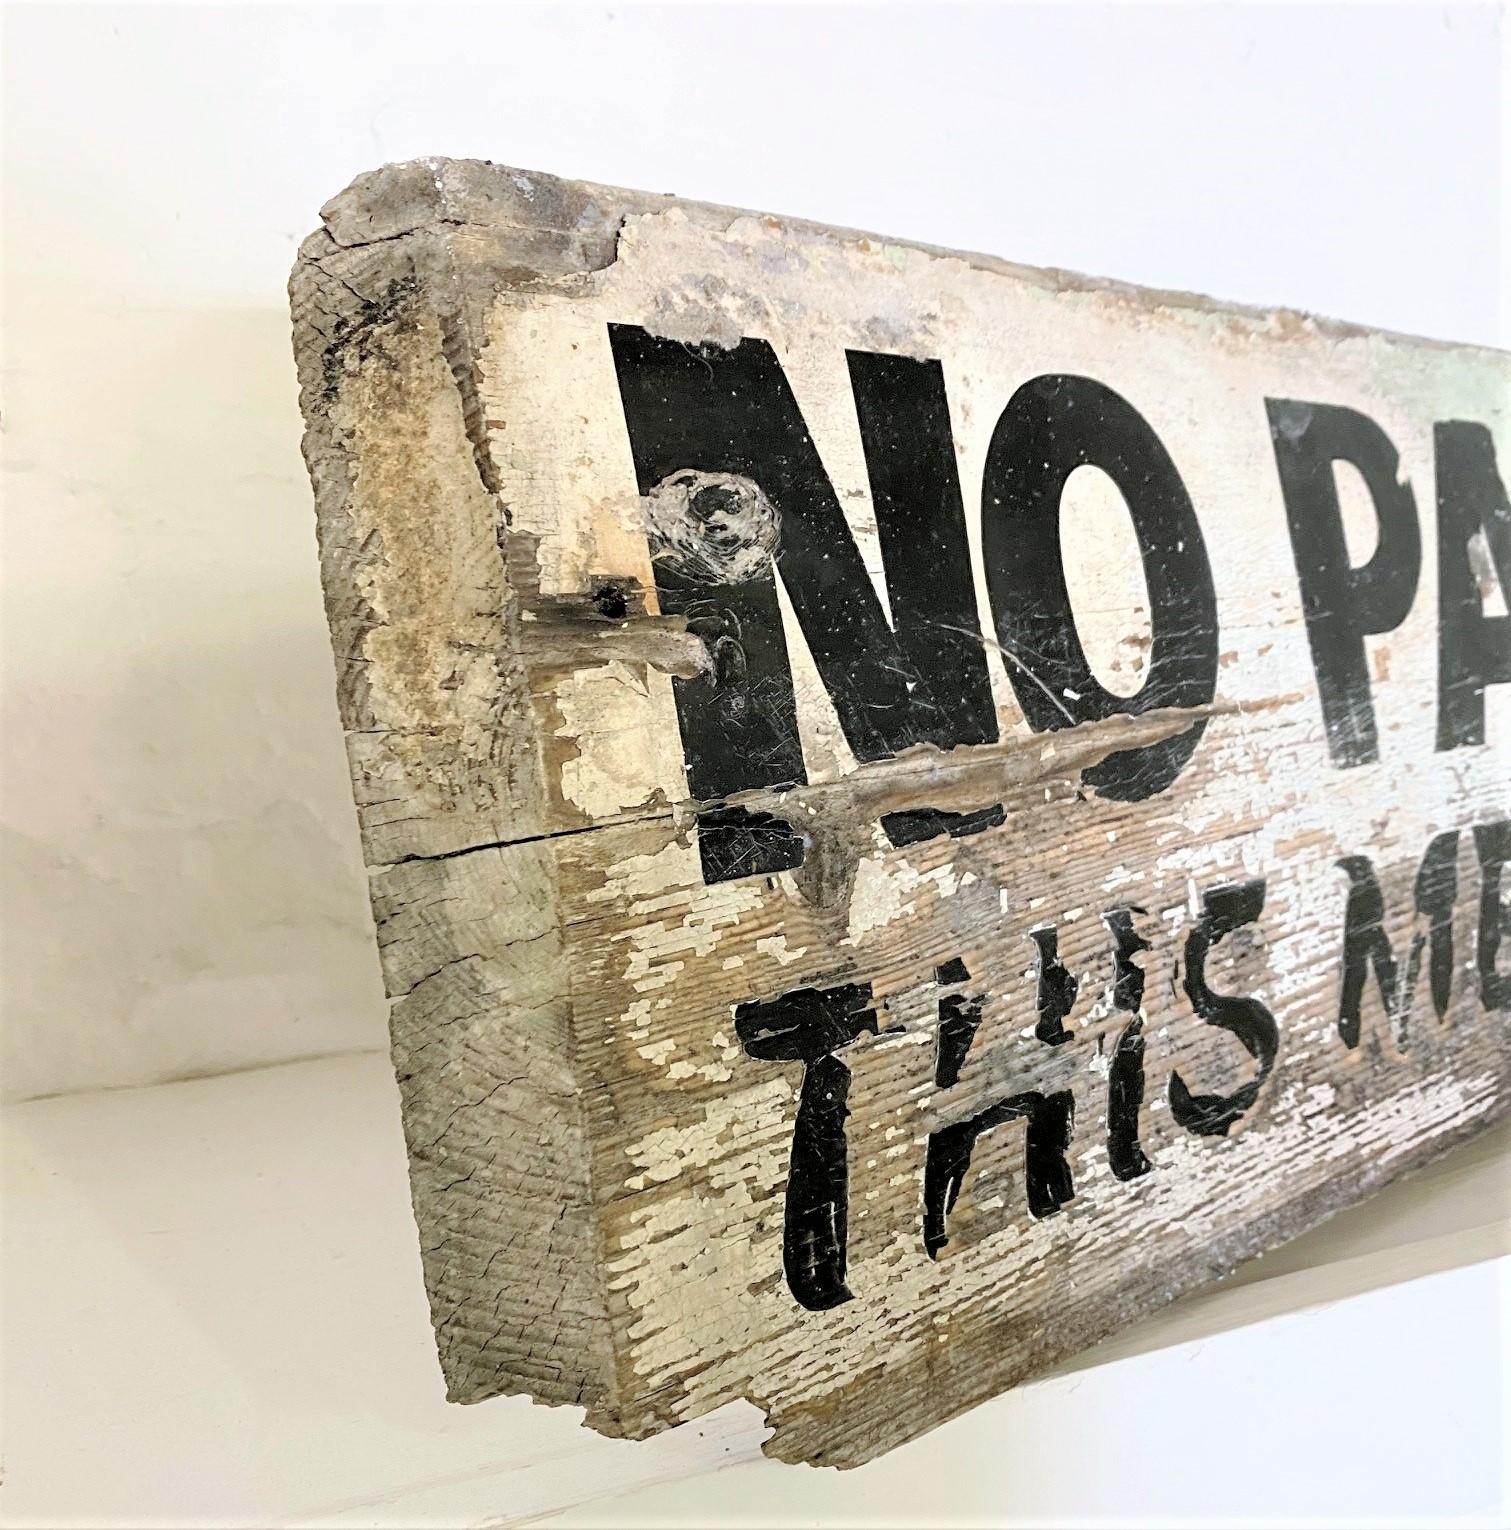 A fun hand painted wooden sign reads ‘NO PARKING THIS MEANS YOU’ – Definitely some British humour!
A very old sign, probably dates back to Mid 20th Century. the condition is as seen, the wood is old but has been treated and sealed to preserve the